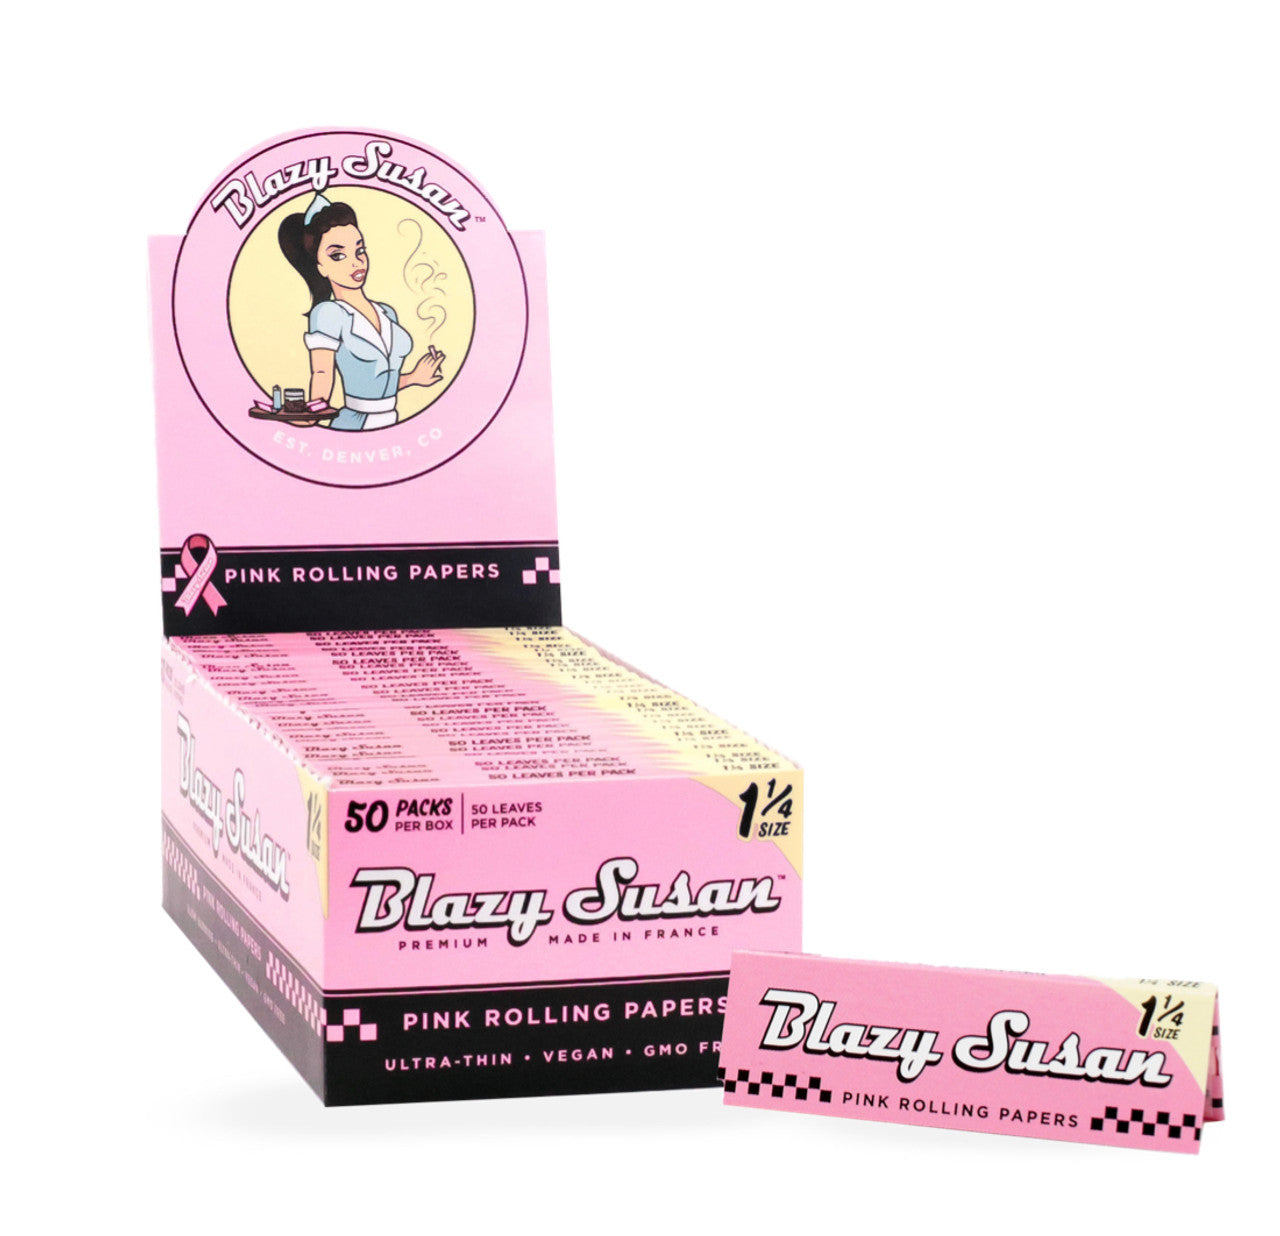 Blazy Susan 1 ¼ Rolling Papers Wholesale – 1 Box / 50packs